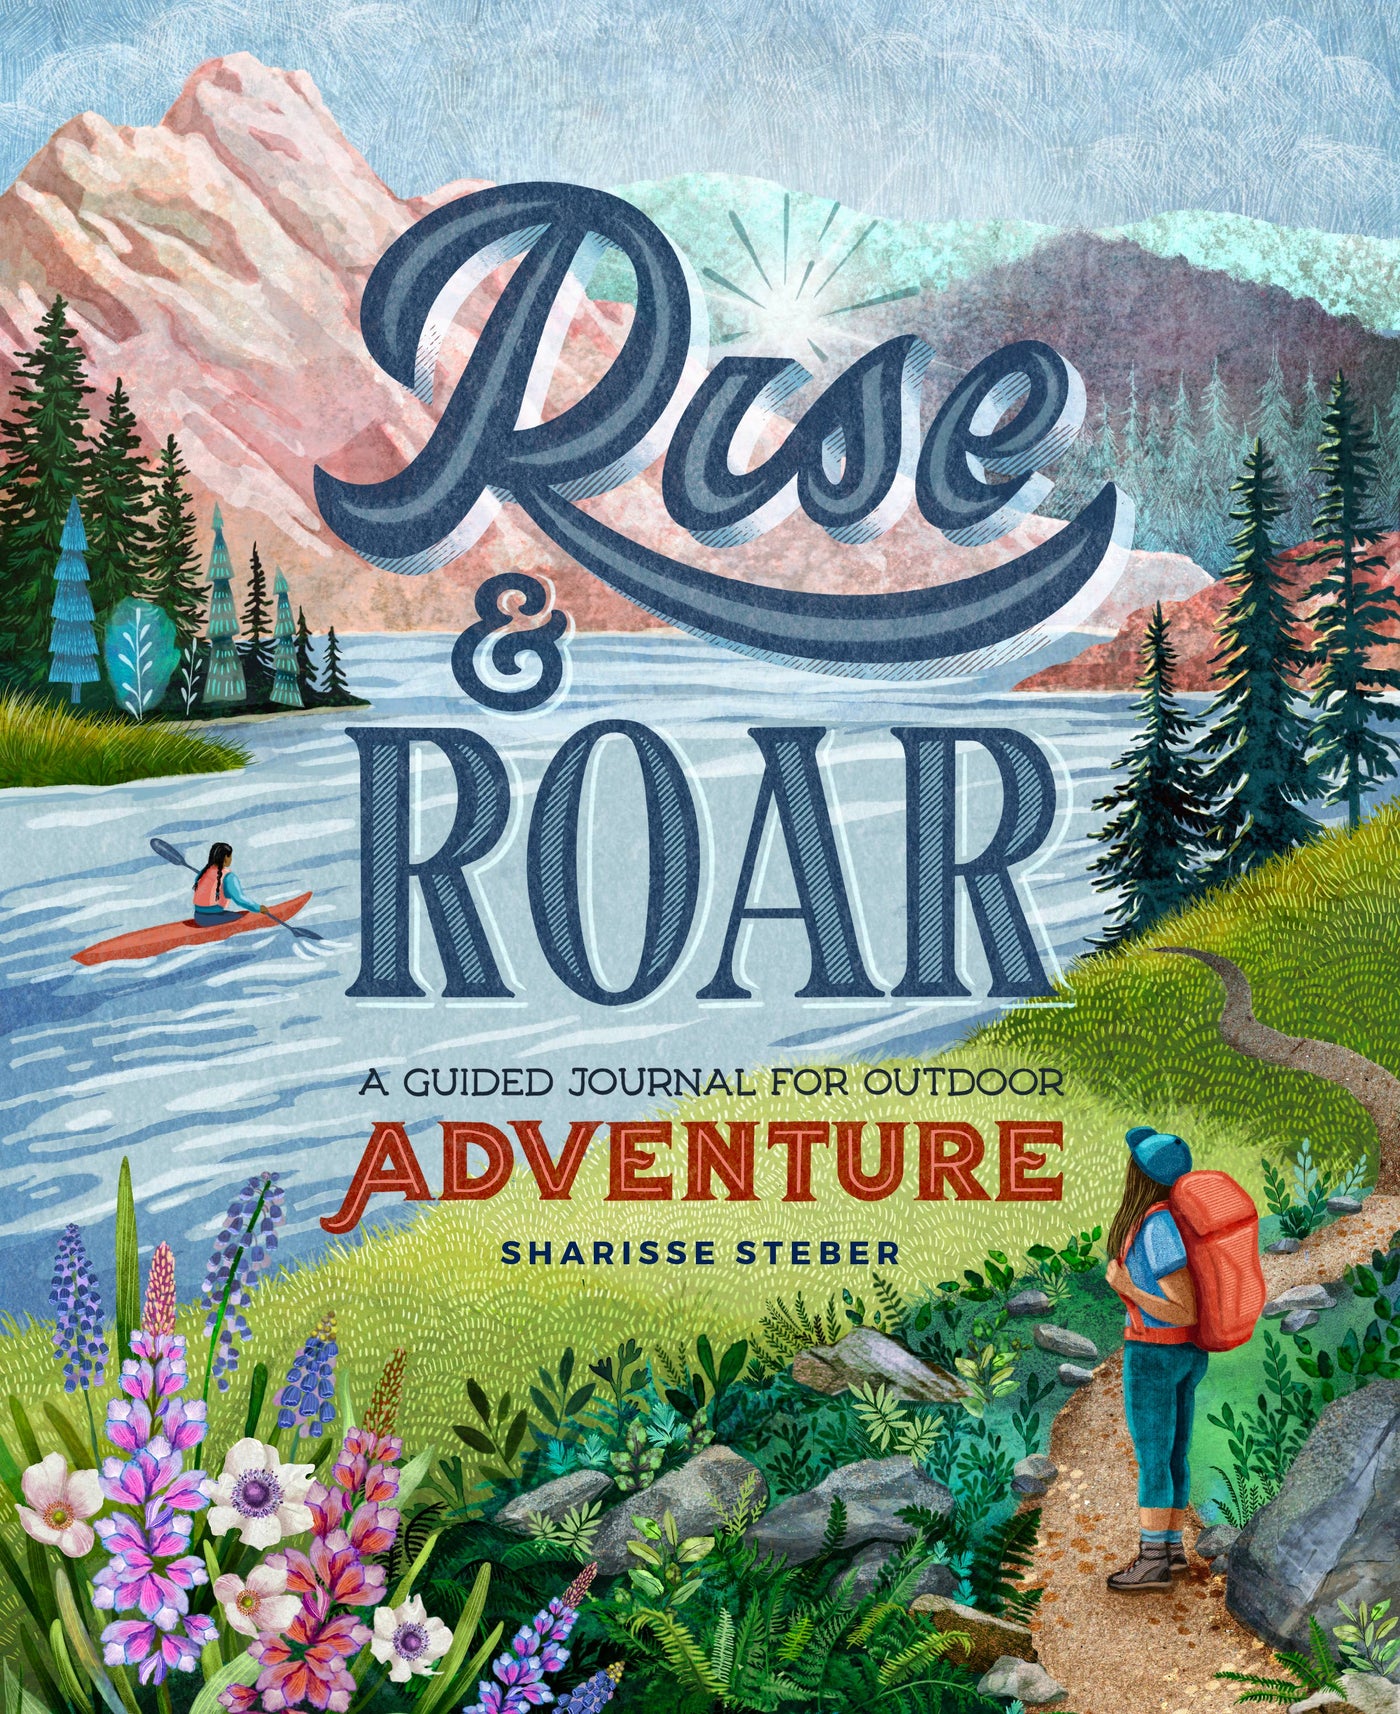 Rise and Roar: A Guided Journal for Outdoor Adventure - The Lake and Company